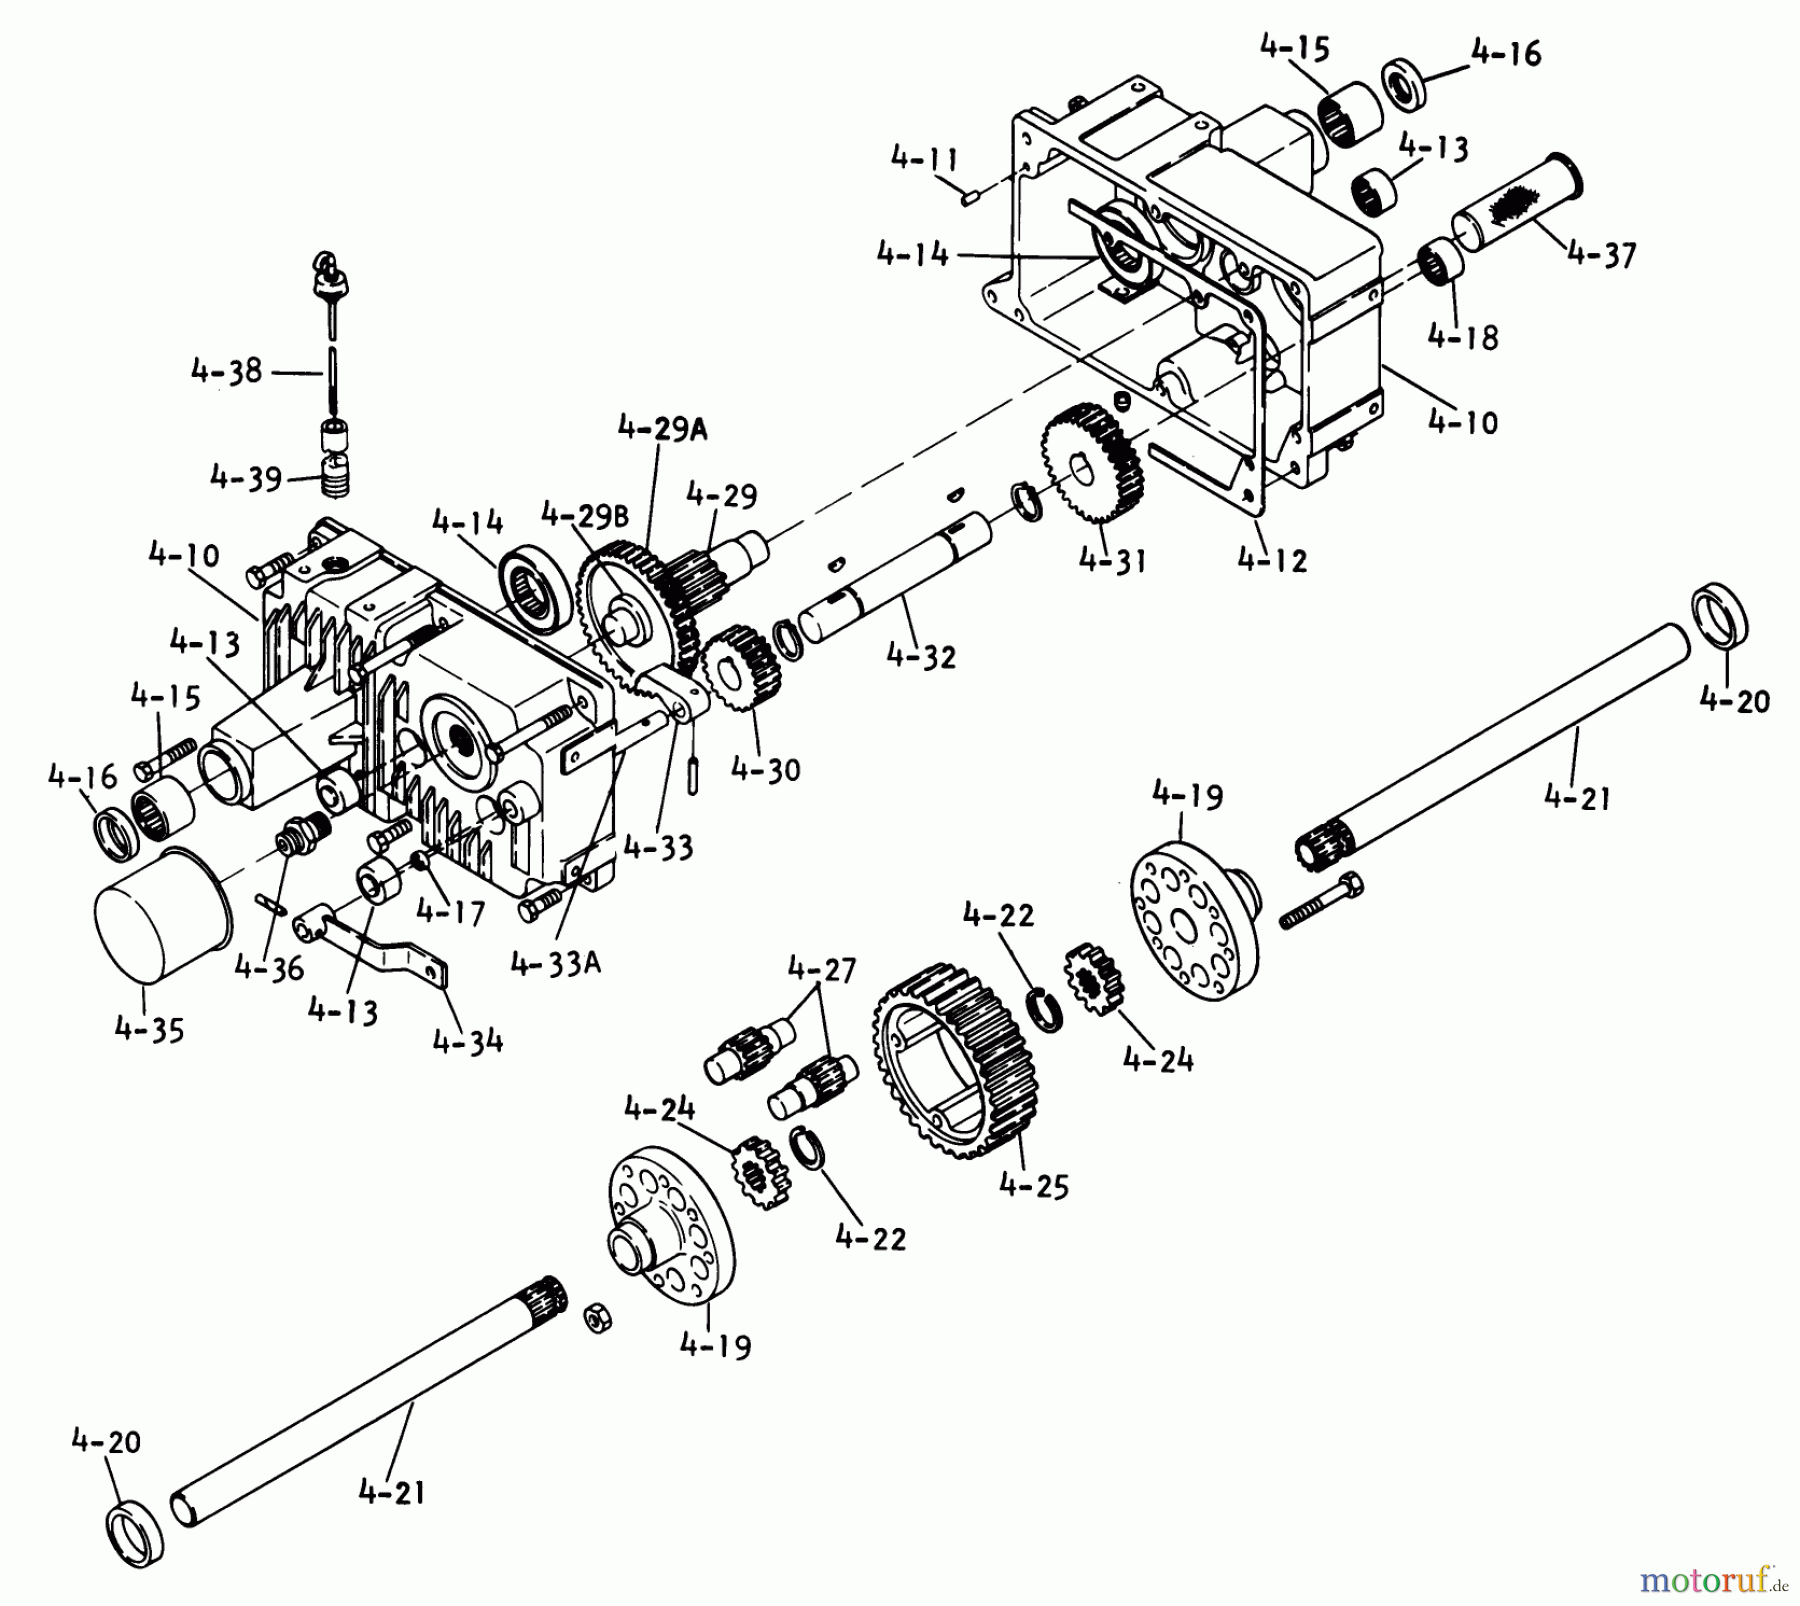  Toro Neu Mowers, Lawn & Garden Tractor Seite 1 1-0612 (D-180) - Toro D-180 Automatic Tractor, 1975 4.010 TRANSAXLE-COMPONENT PARTS (FIG. 4A)